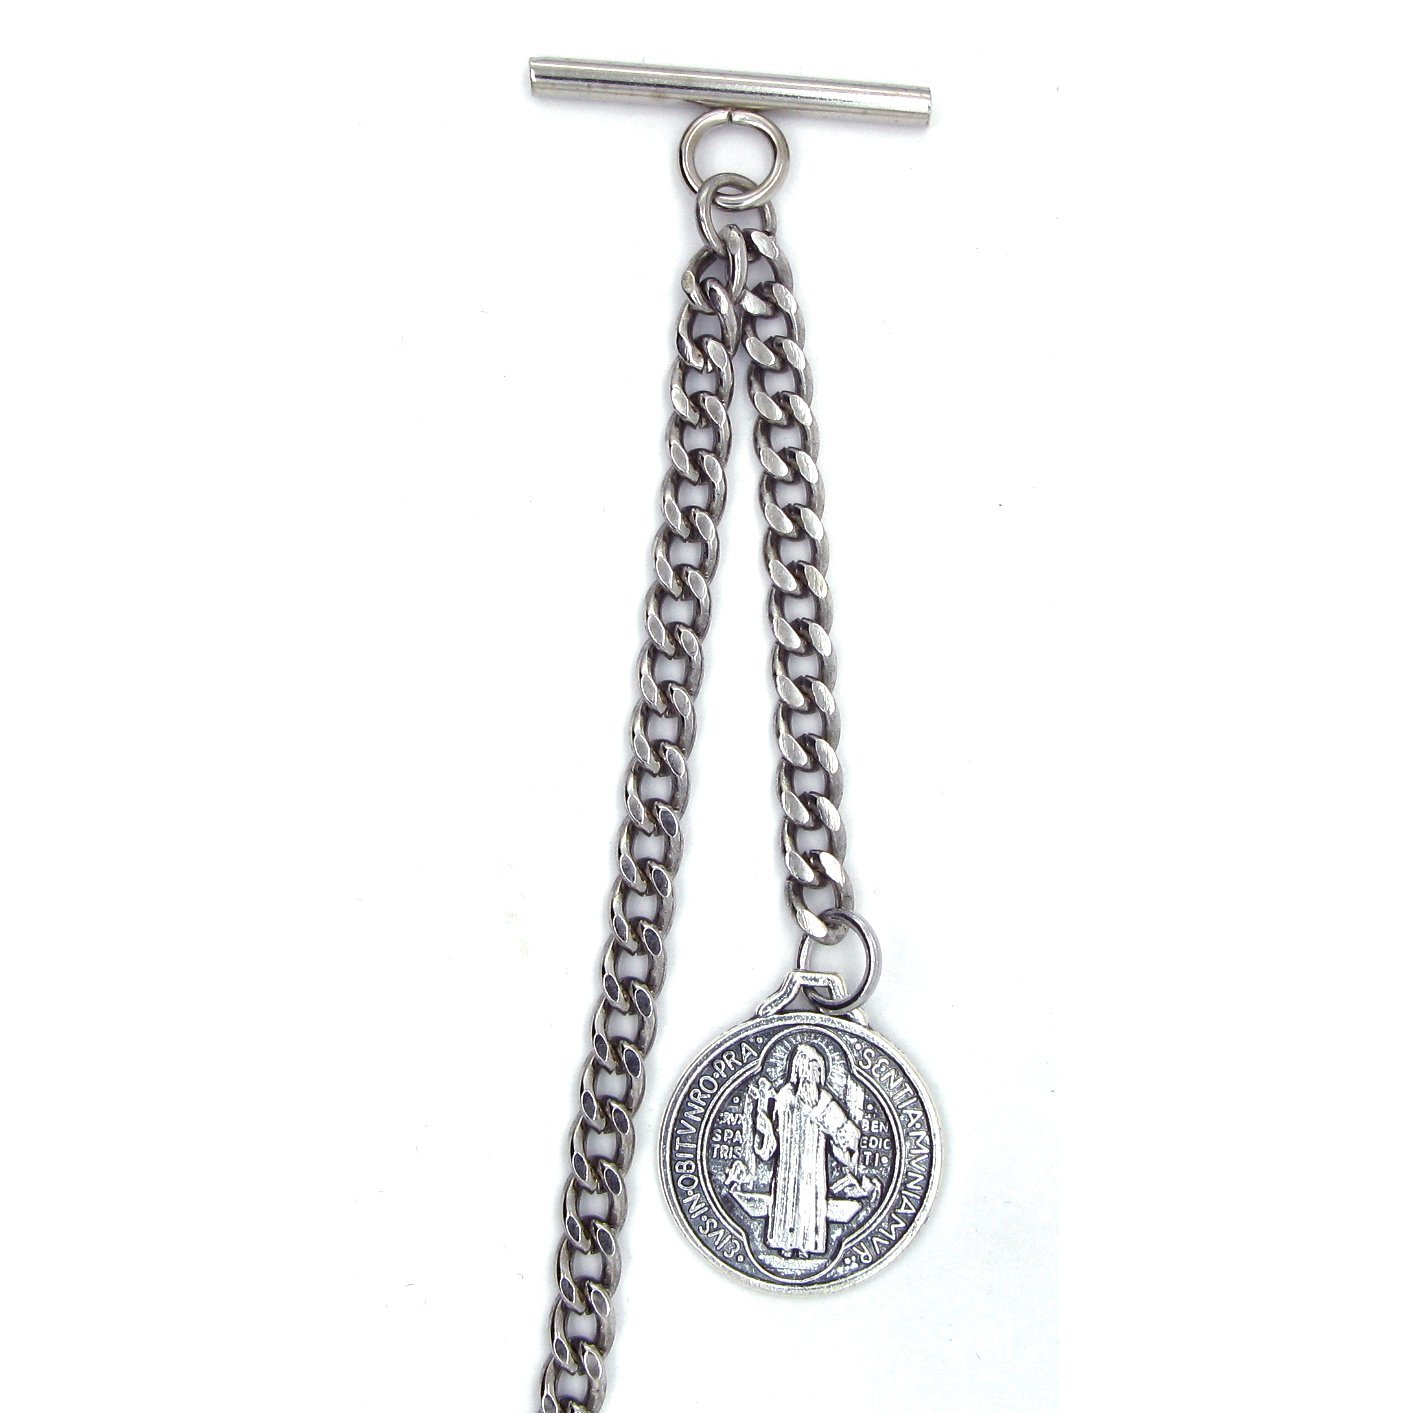 Albert Chain Silver Color Pocket Watch Chains for Men with St. Benedict Medal Fob T Bar AC43